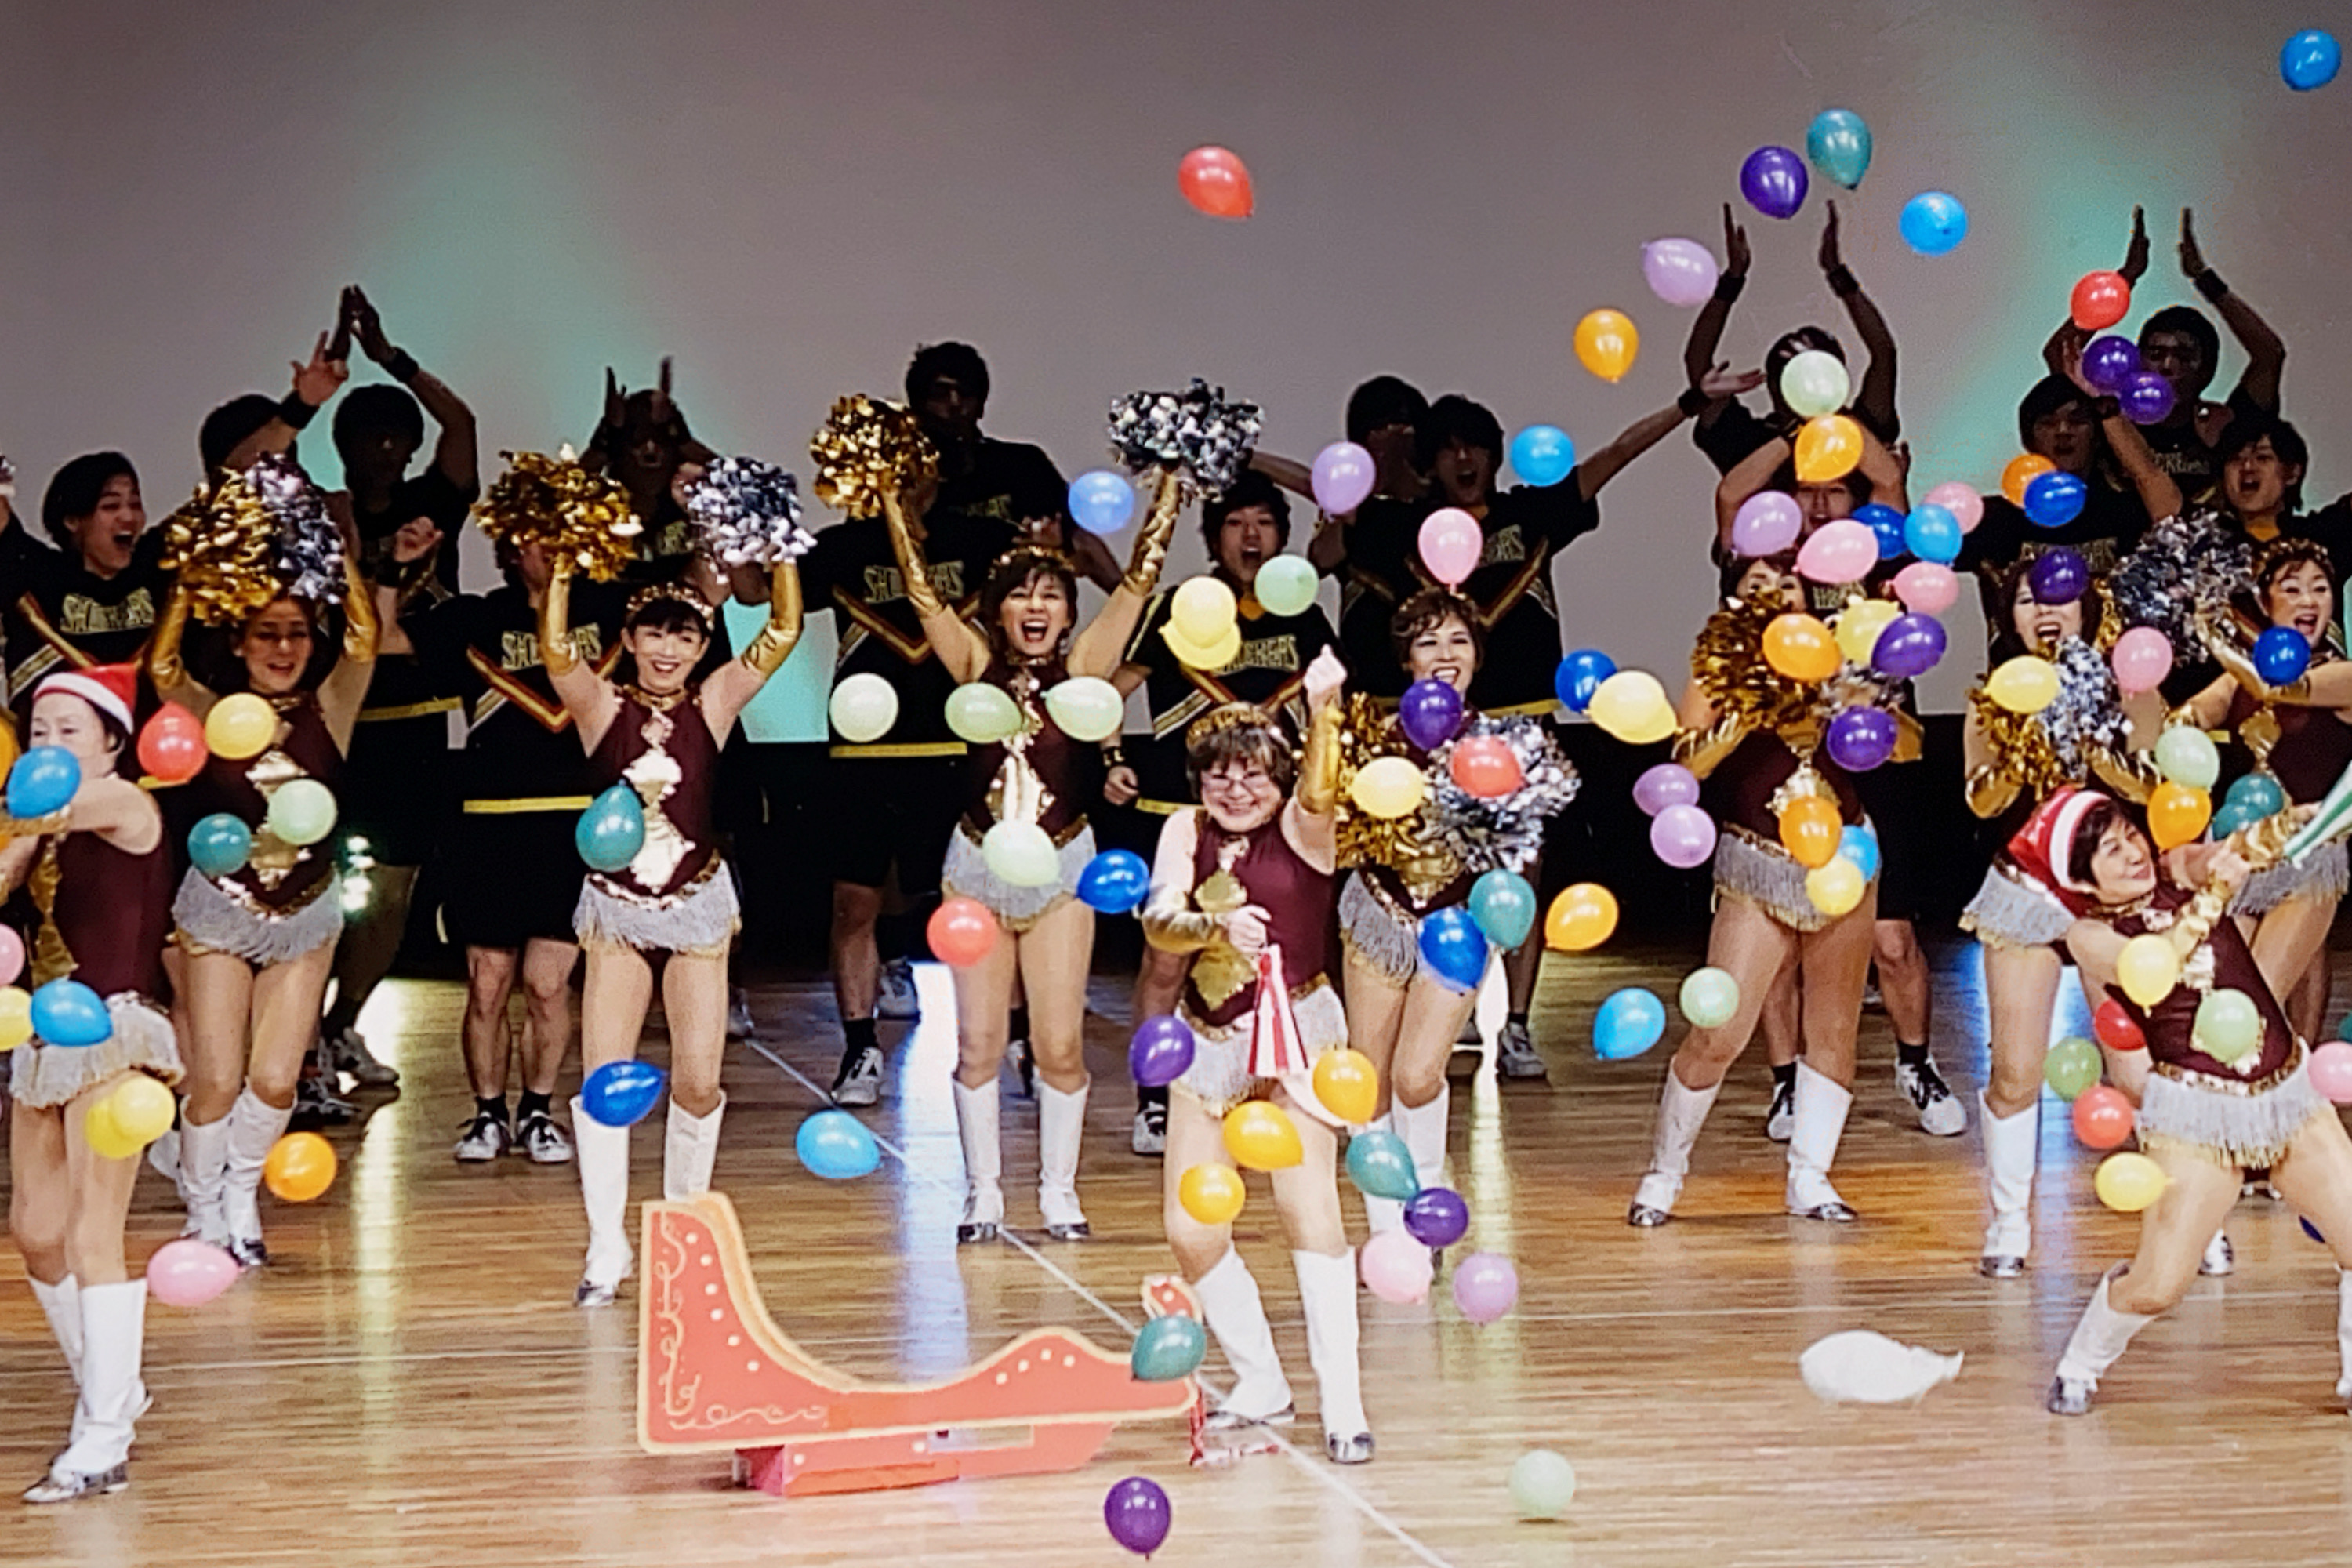 Meet Japan Pom Pom: The Cheer Squad Where Members Are in Their 70s